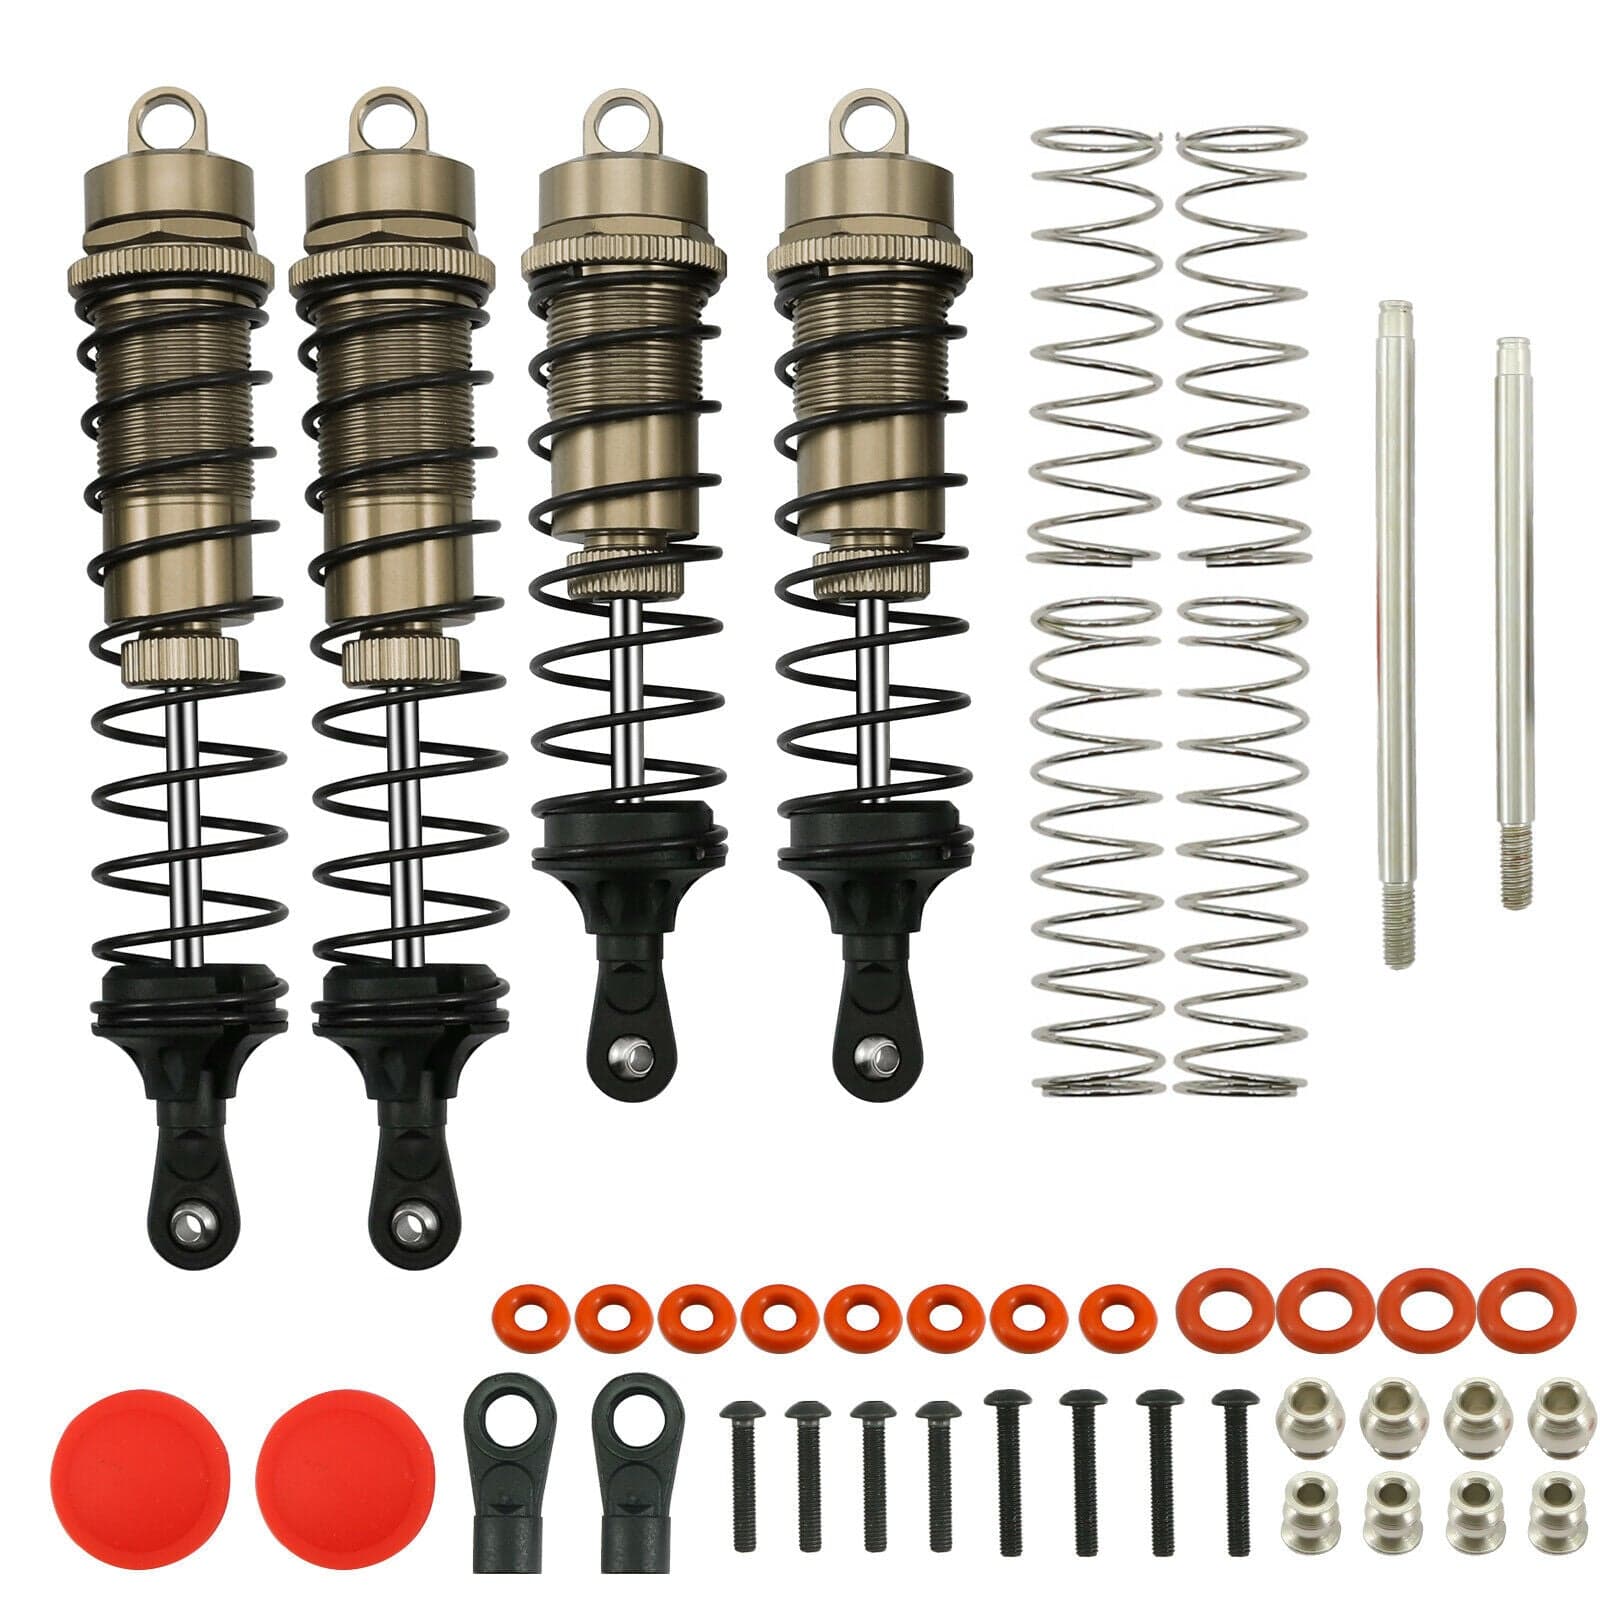 RCAWD ARRMA UPGRADE PARTS TI RCAWD AR330552 Front Rear Shocks For Arrma 1/10 Outcast Kraton 4S BLX 4X4